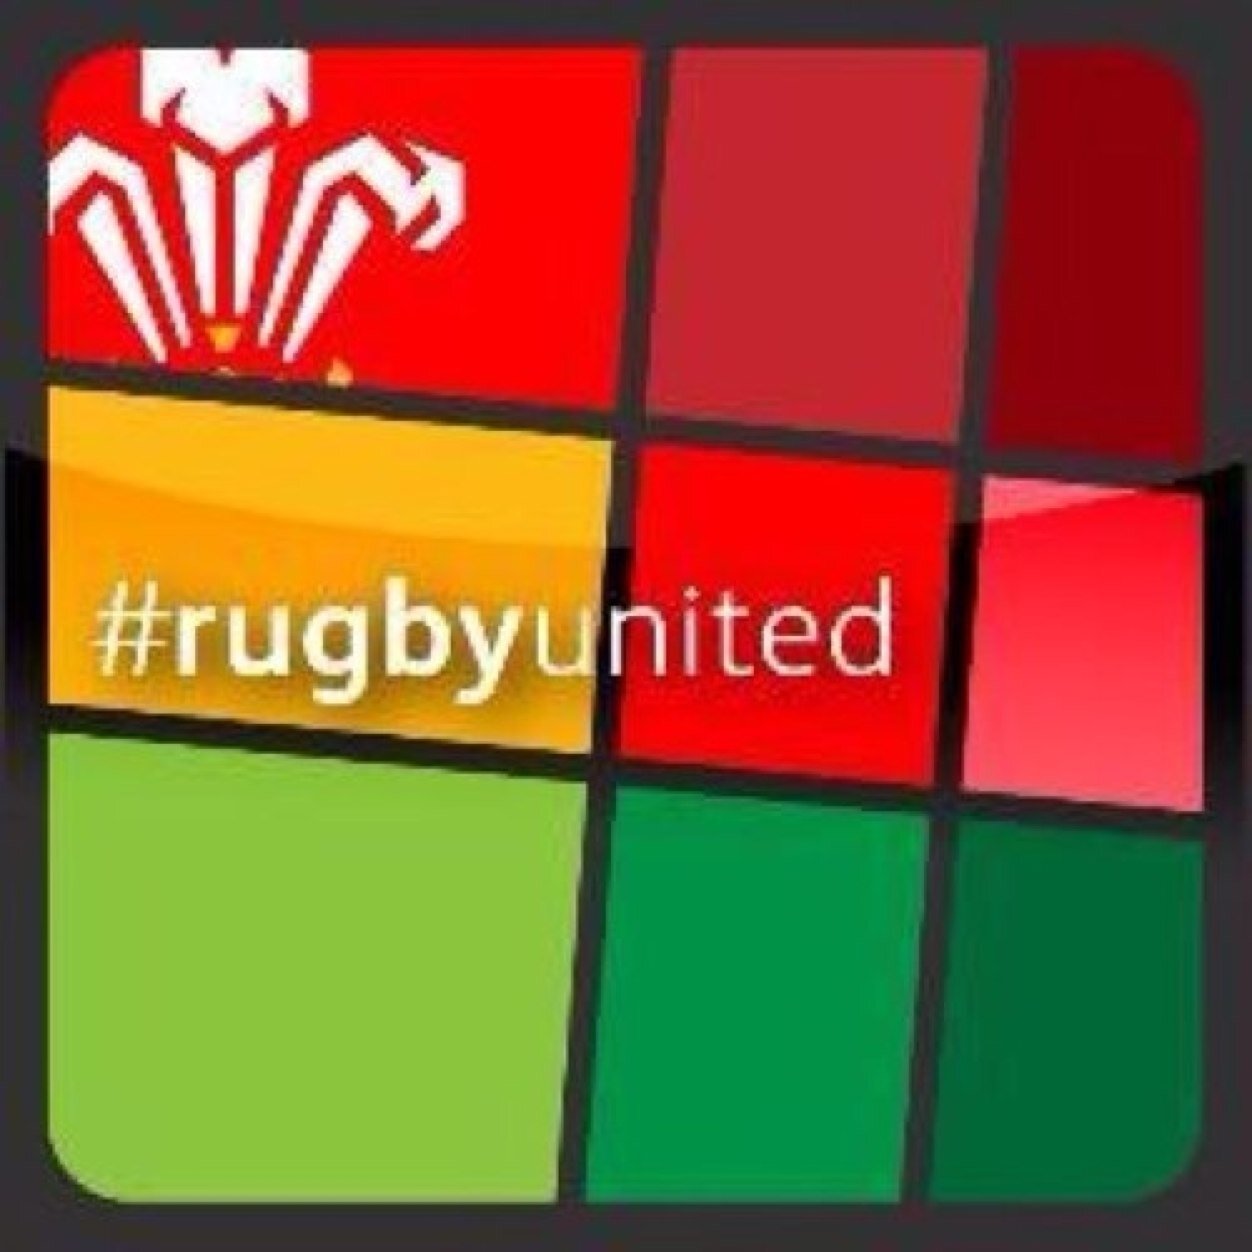 #rugbywales. 🏴󠁧󠁢󠁷󠁬󠁳󠁿🏉🏳️‍🌈